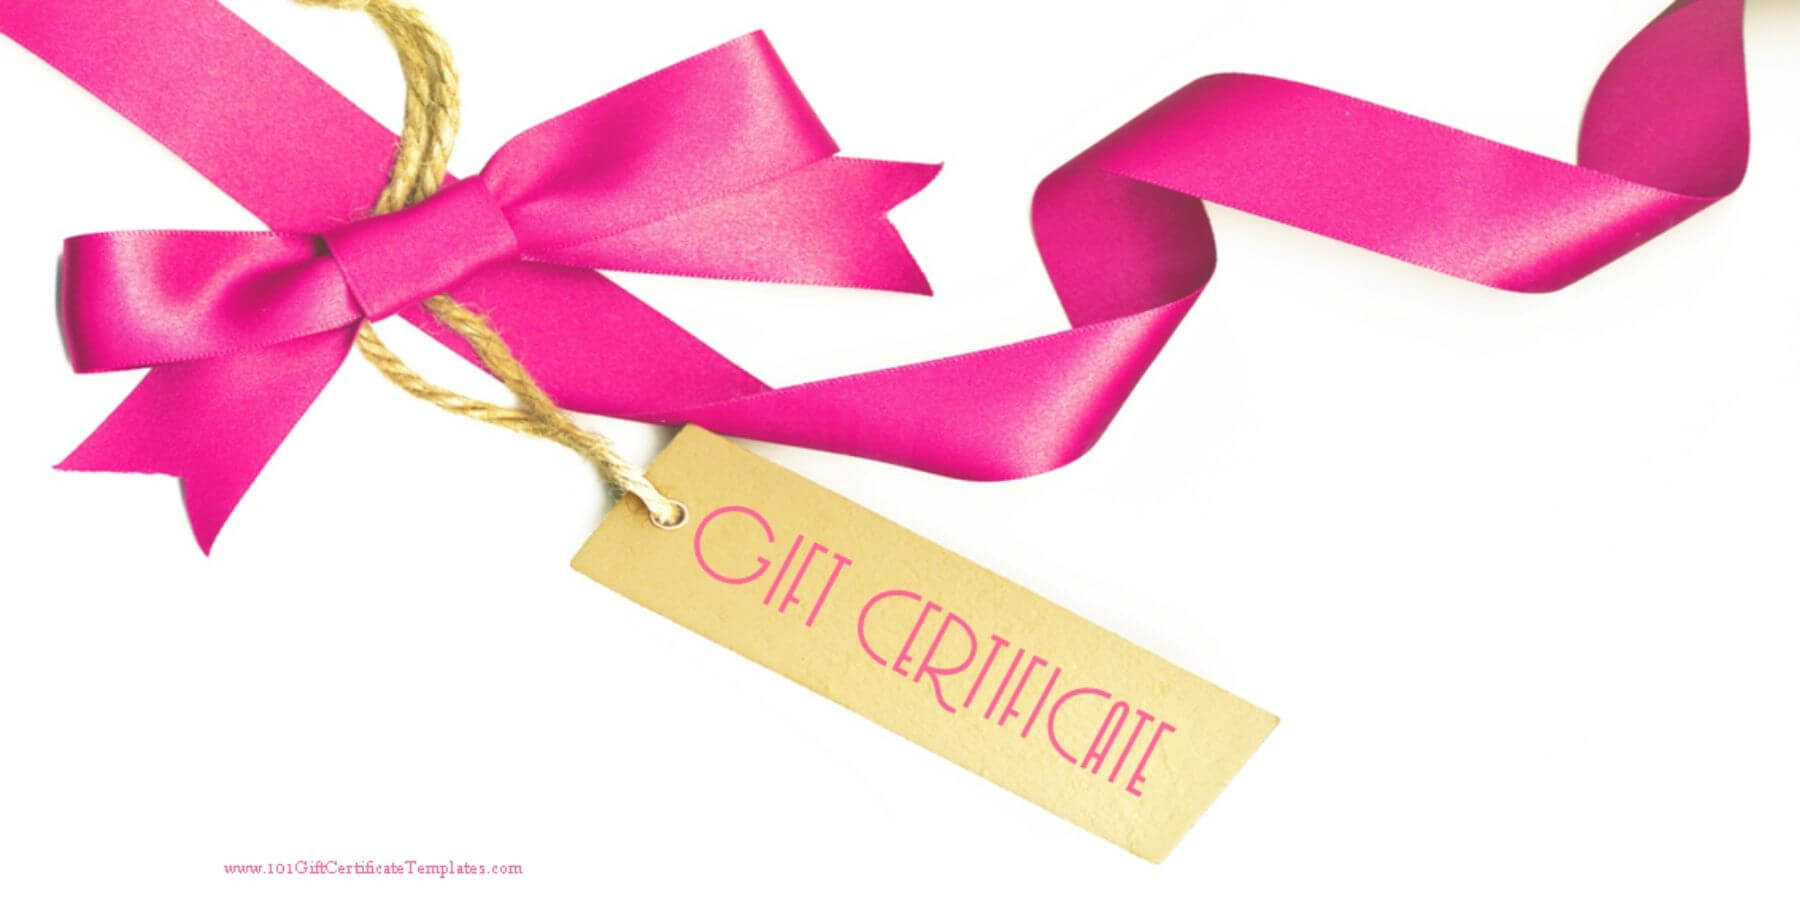 Gift Certificate With A White Background And A Pink Ribbon Regarding Pink Gift Certificate Template